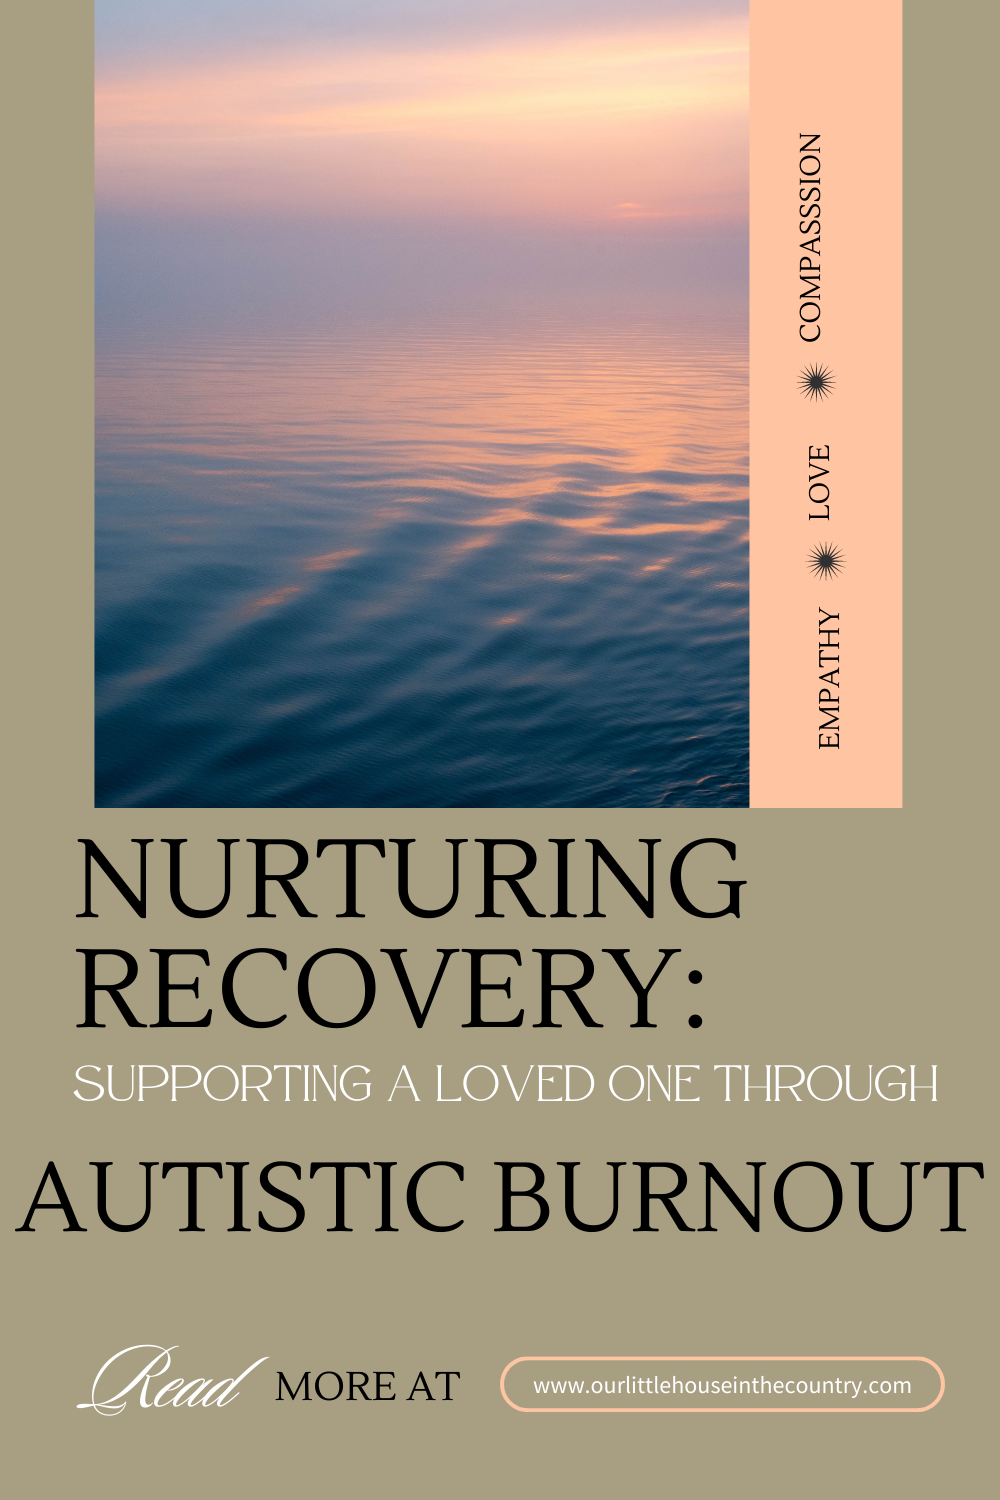 Supporting a loved one as they recover from Autistic Burnout